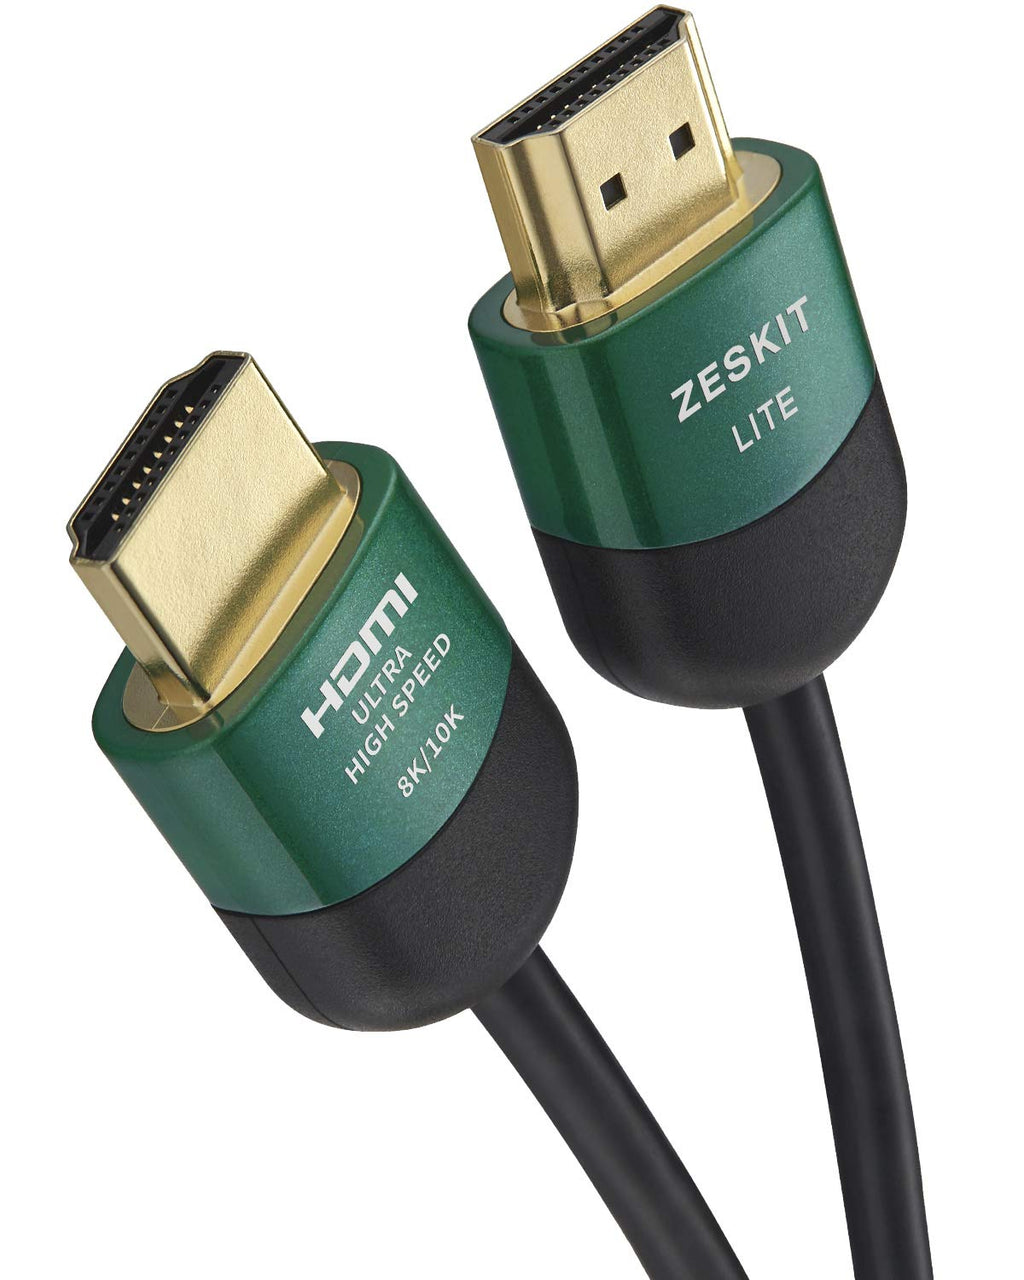 Zeskit Lite 48Gbps Slim Certified Ultra High Speed HDMI Cable 1.5ft, 4K120 8K60 144Hz eARC HDR HDCP 2.2 2.3 Compatible with Dolby Vision Apple TV 4K Roku Sony LG Samsung Xbox Series X RTX 3080 PS4 PS5 0.5m/1.5ft